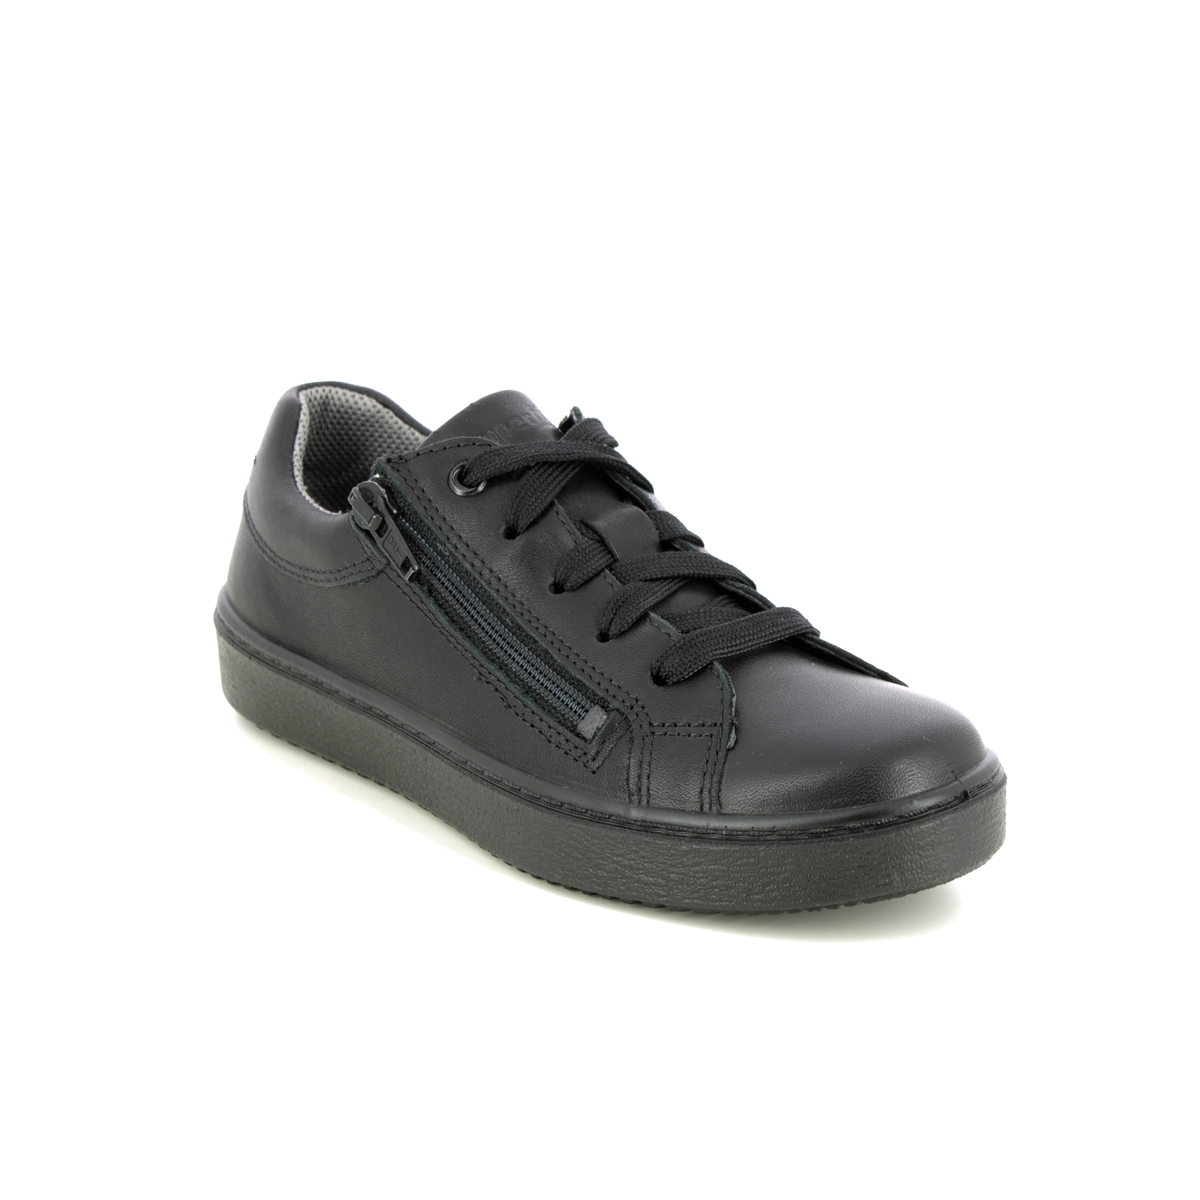 Superfit Heaven Zip Lace Black Leather Kids Girls Shoes 1006489-0000 In Size 37 In Plain Black Leather For kids